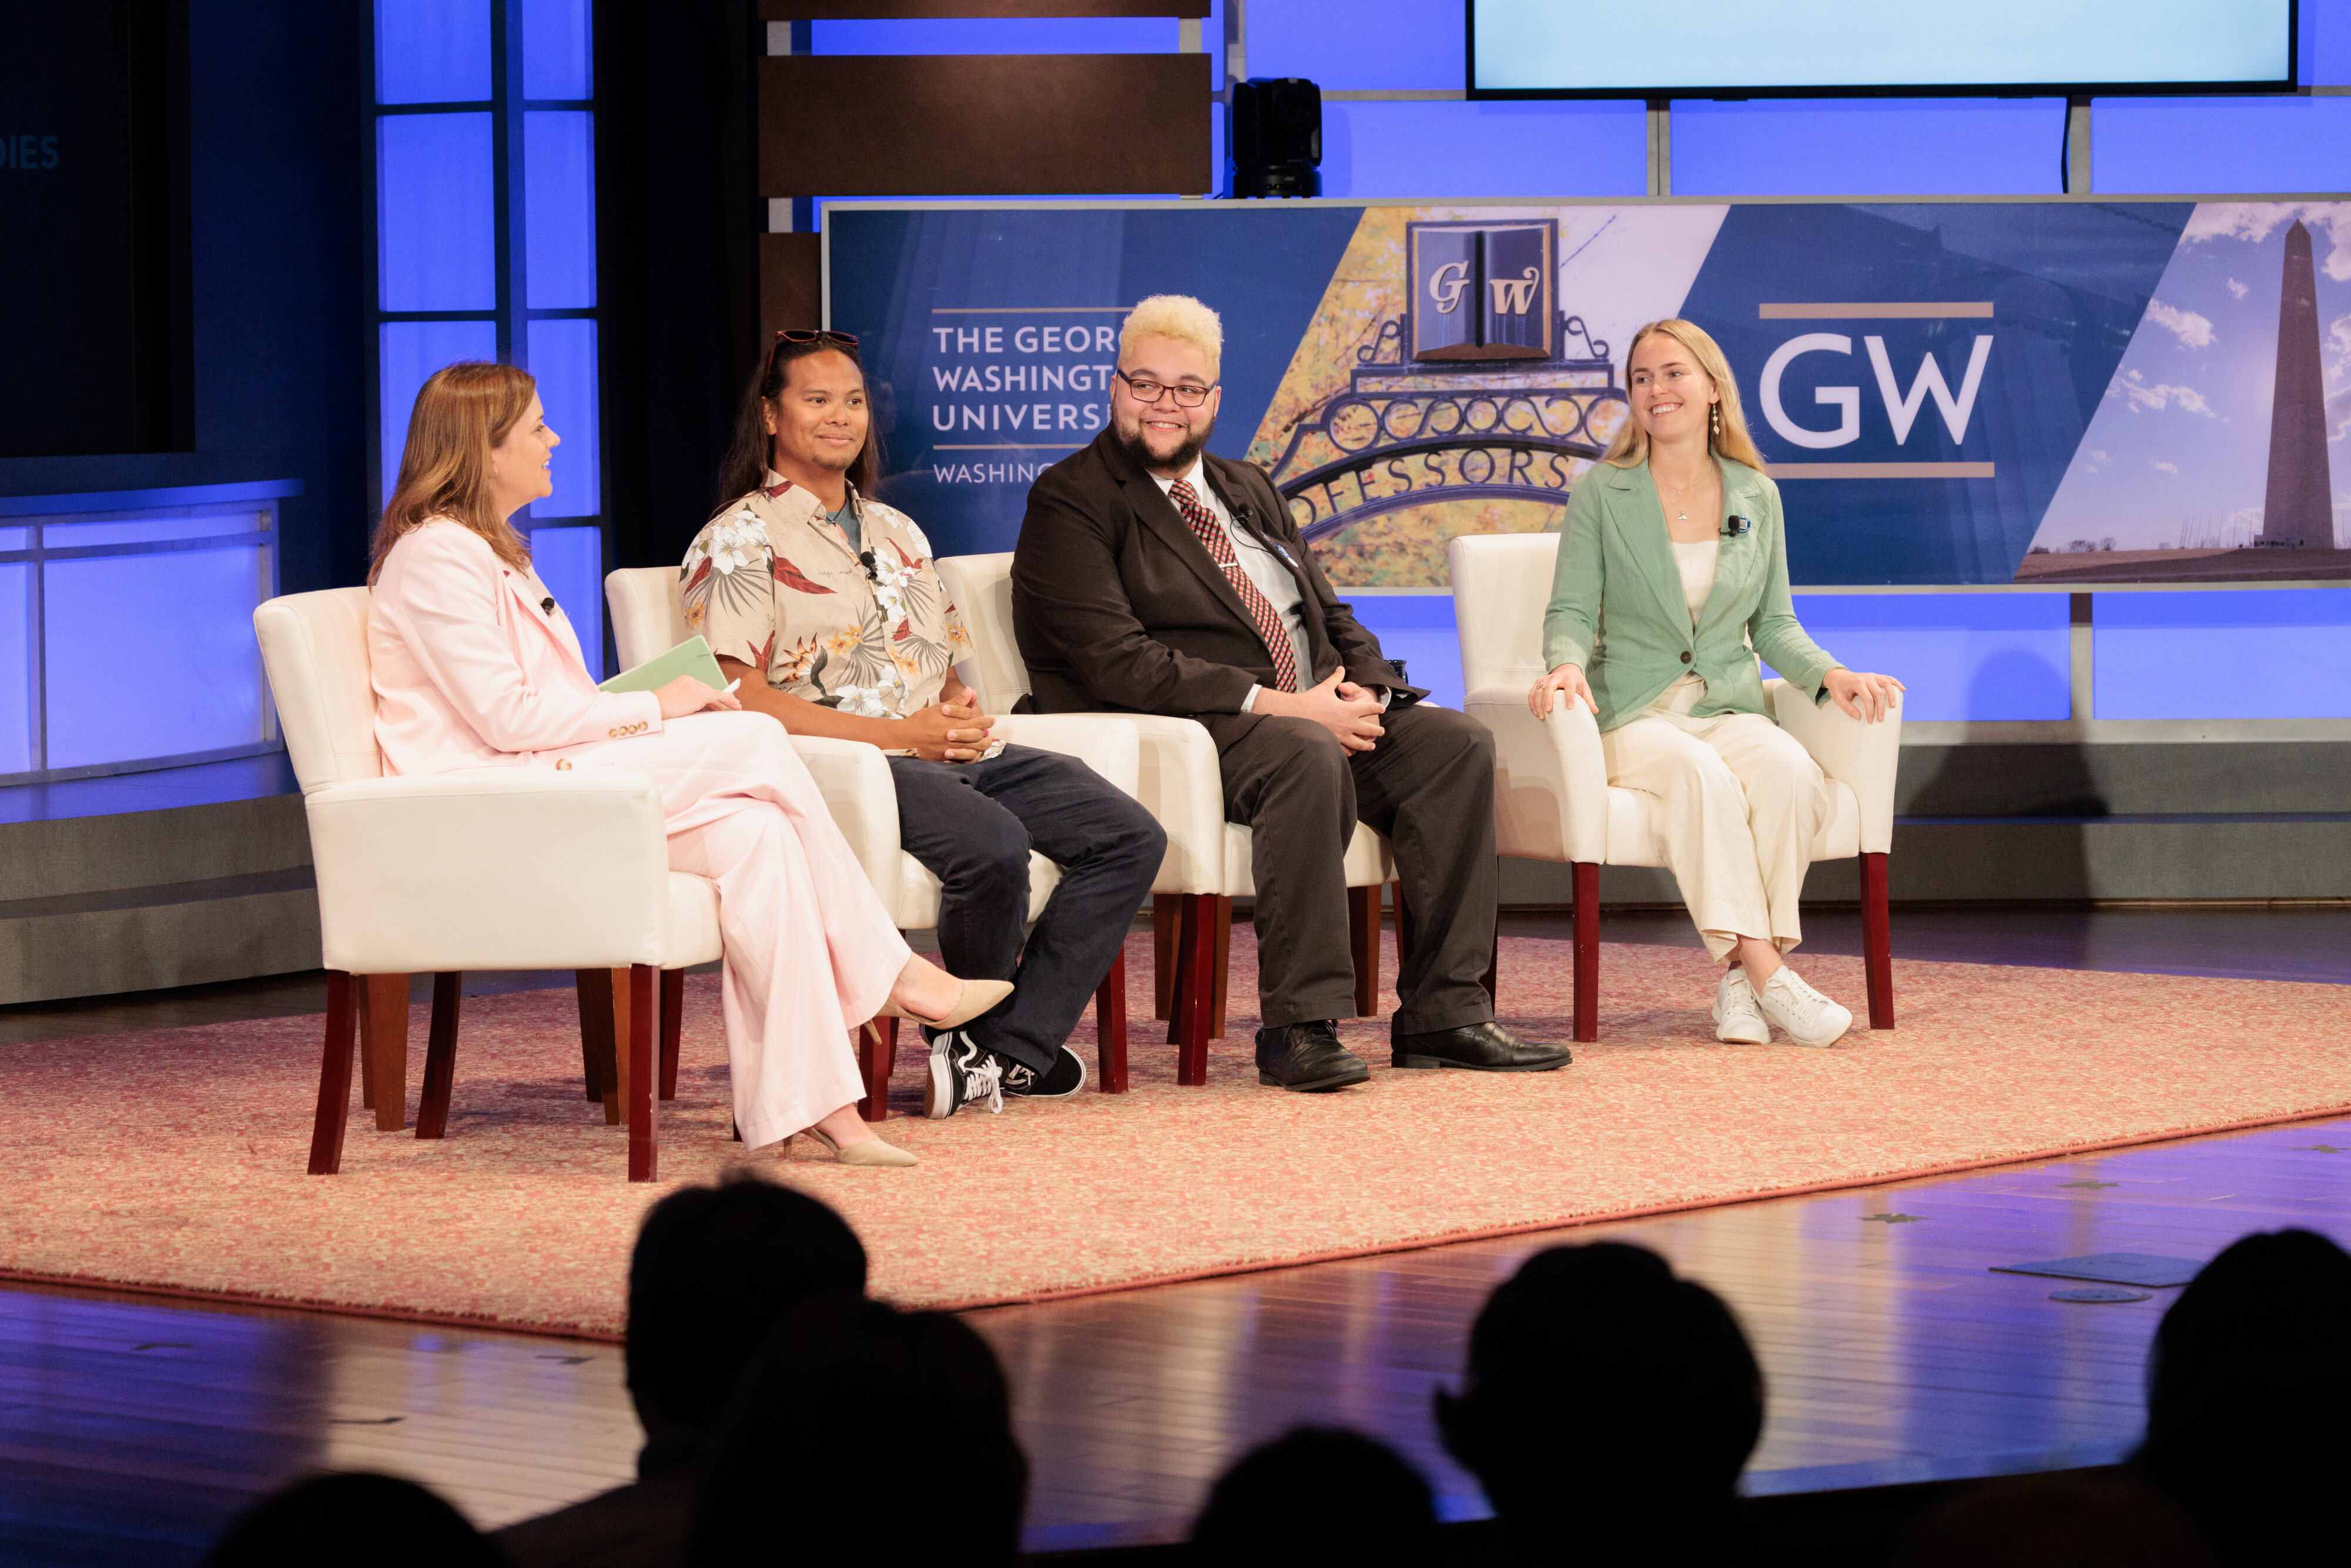 From left: Kaitlyn Yarnall, Chief Storytelling Officer, National Geographic Society; Farron Taijeron, University of Guam; Owen Volk, SUNY-ESF; and Libby Mohn, Middlebury Institute of International Studies; discuss storytelling from the field.